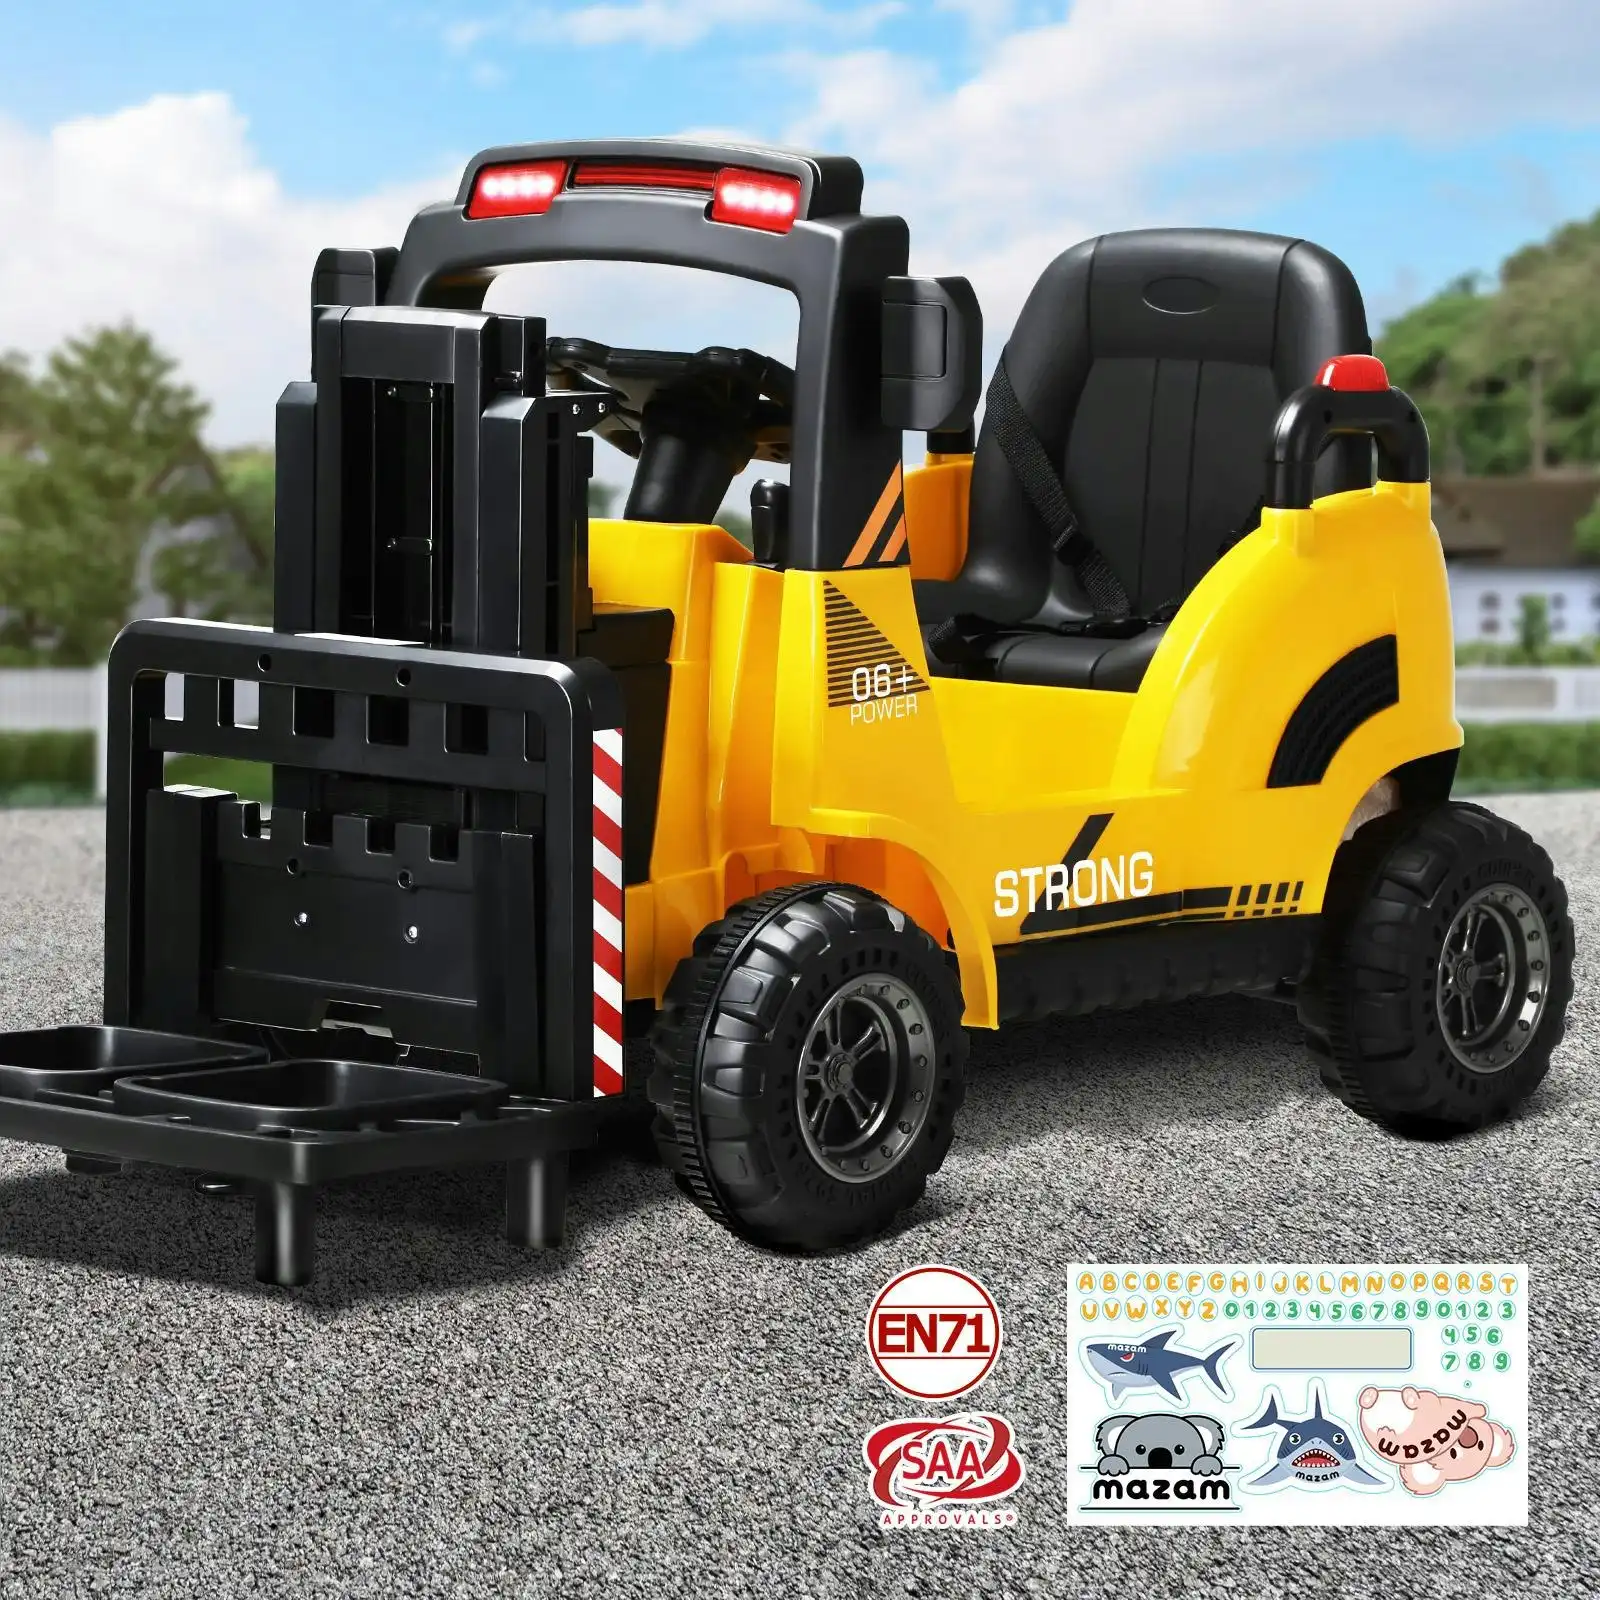 Mazam Kids Ride-On Forklift 12V Electric Operated Car Toy W/ Lift/Load Yellow